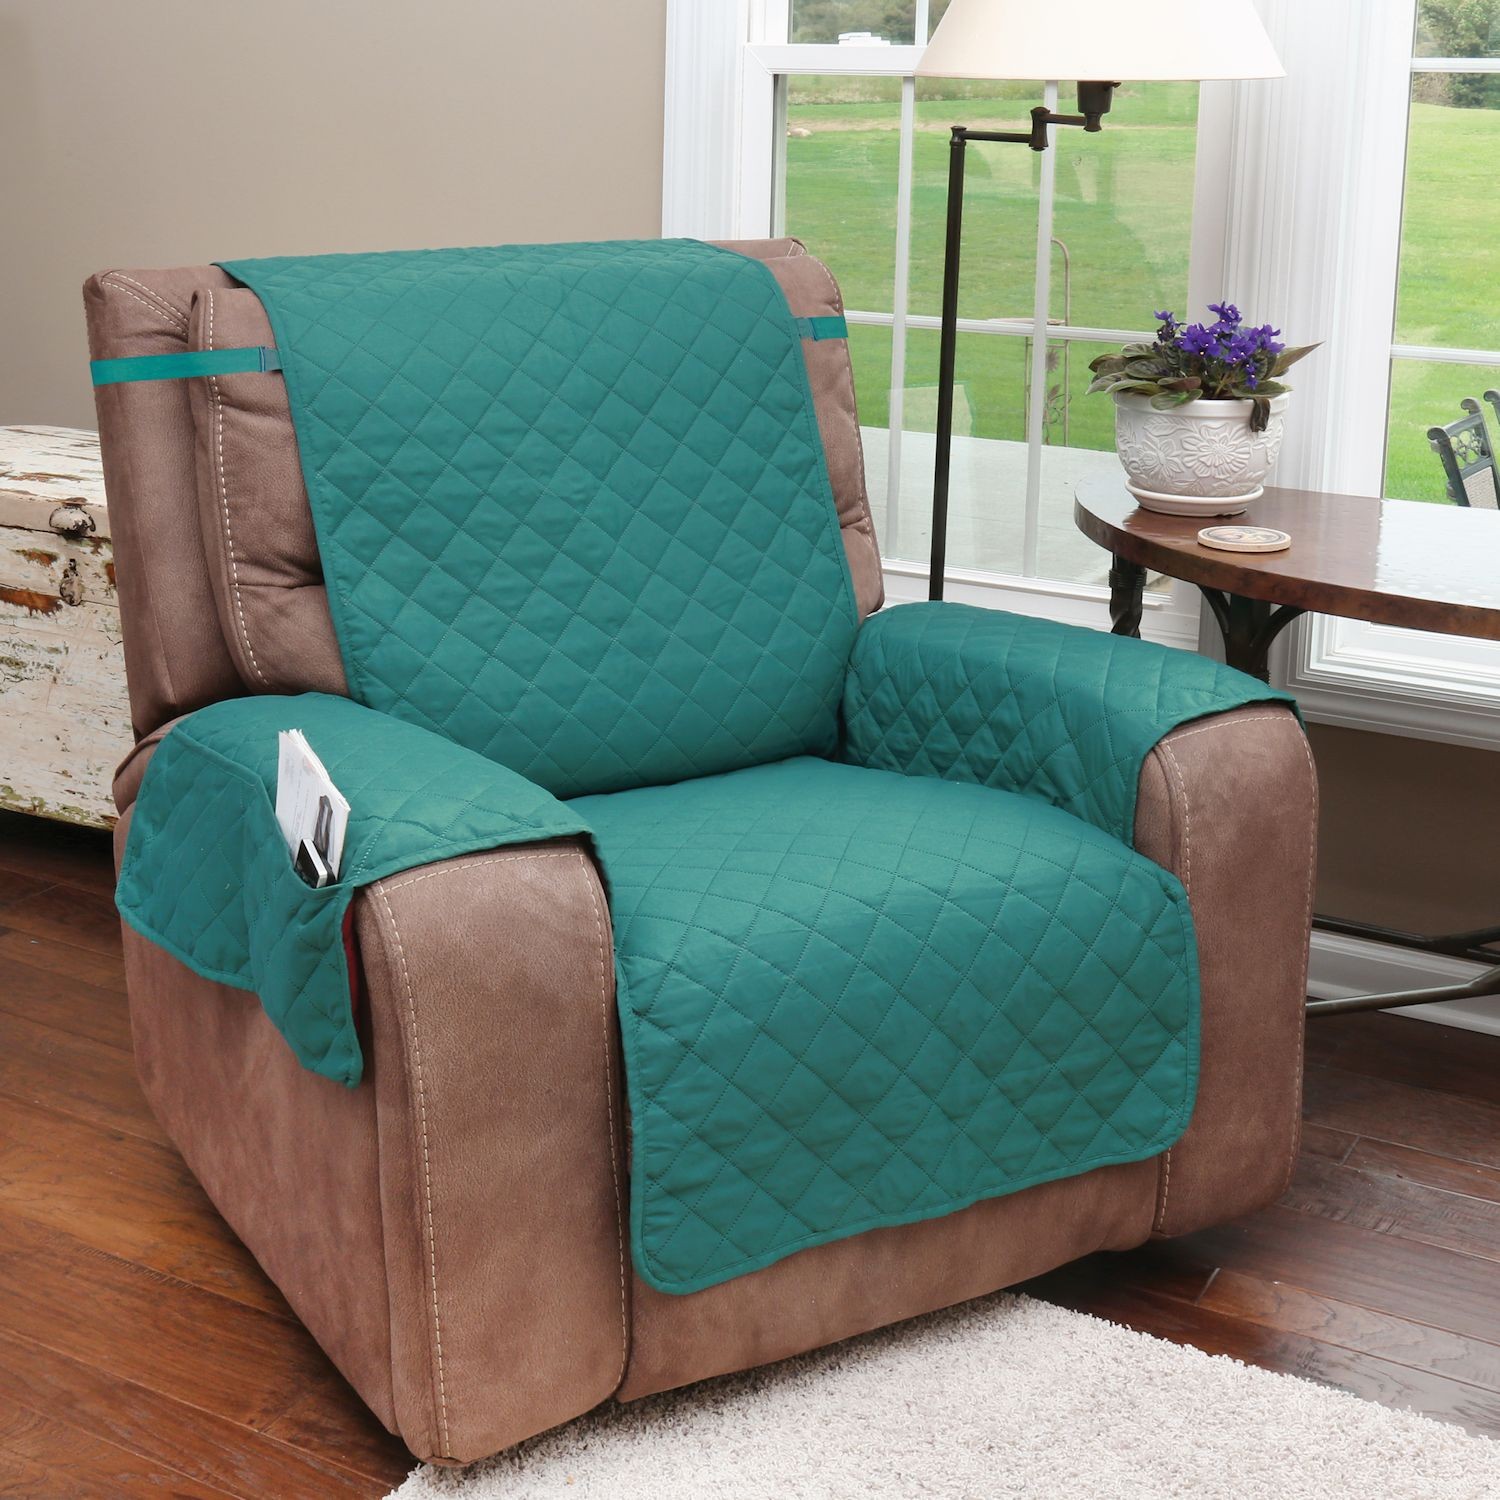 Home District Reversible Recliner Slipcover - Quilted Microfiber Chair